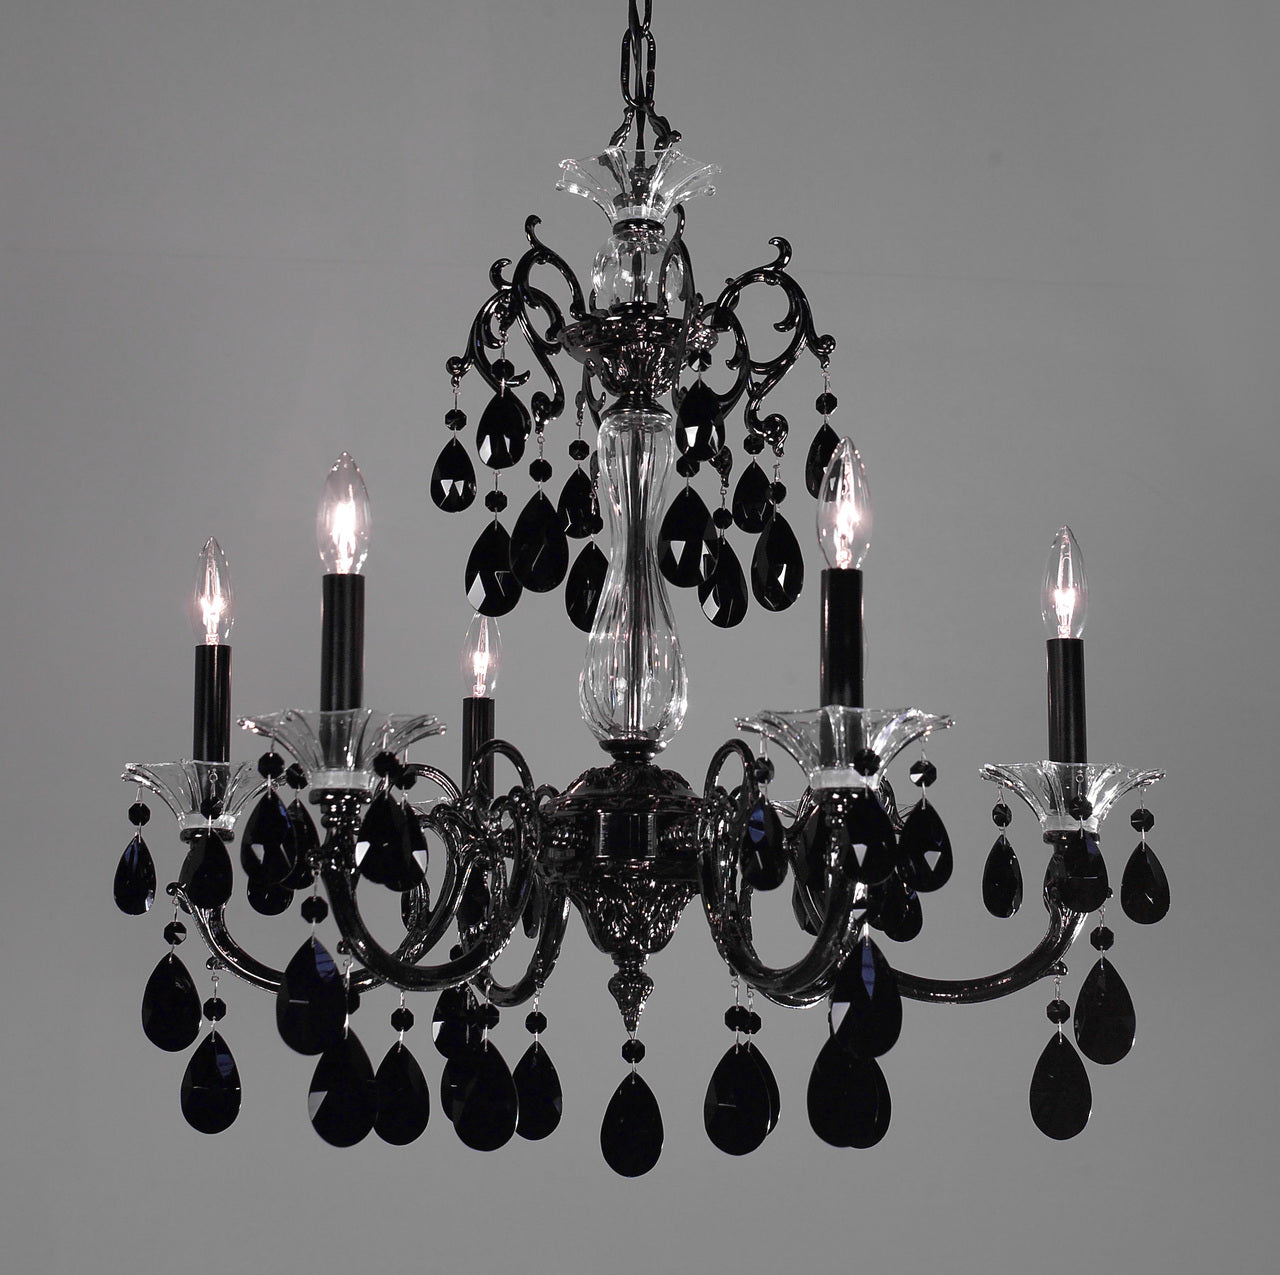 Classic Lighting 57056 MS SC Via Lombardi Crystal Chandelier in Millennium Silver (Imported from Spain)